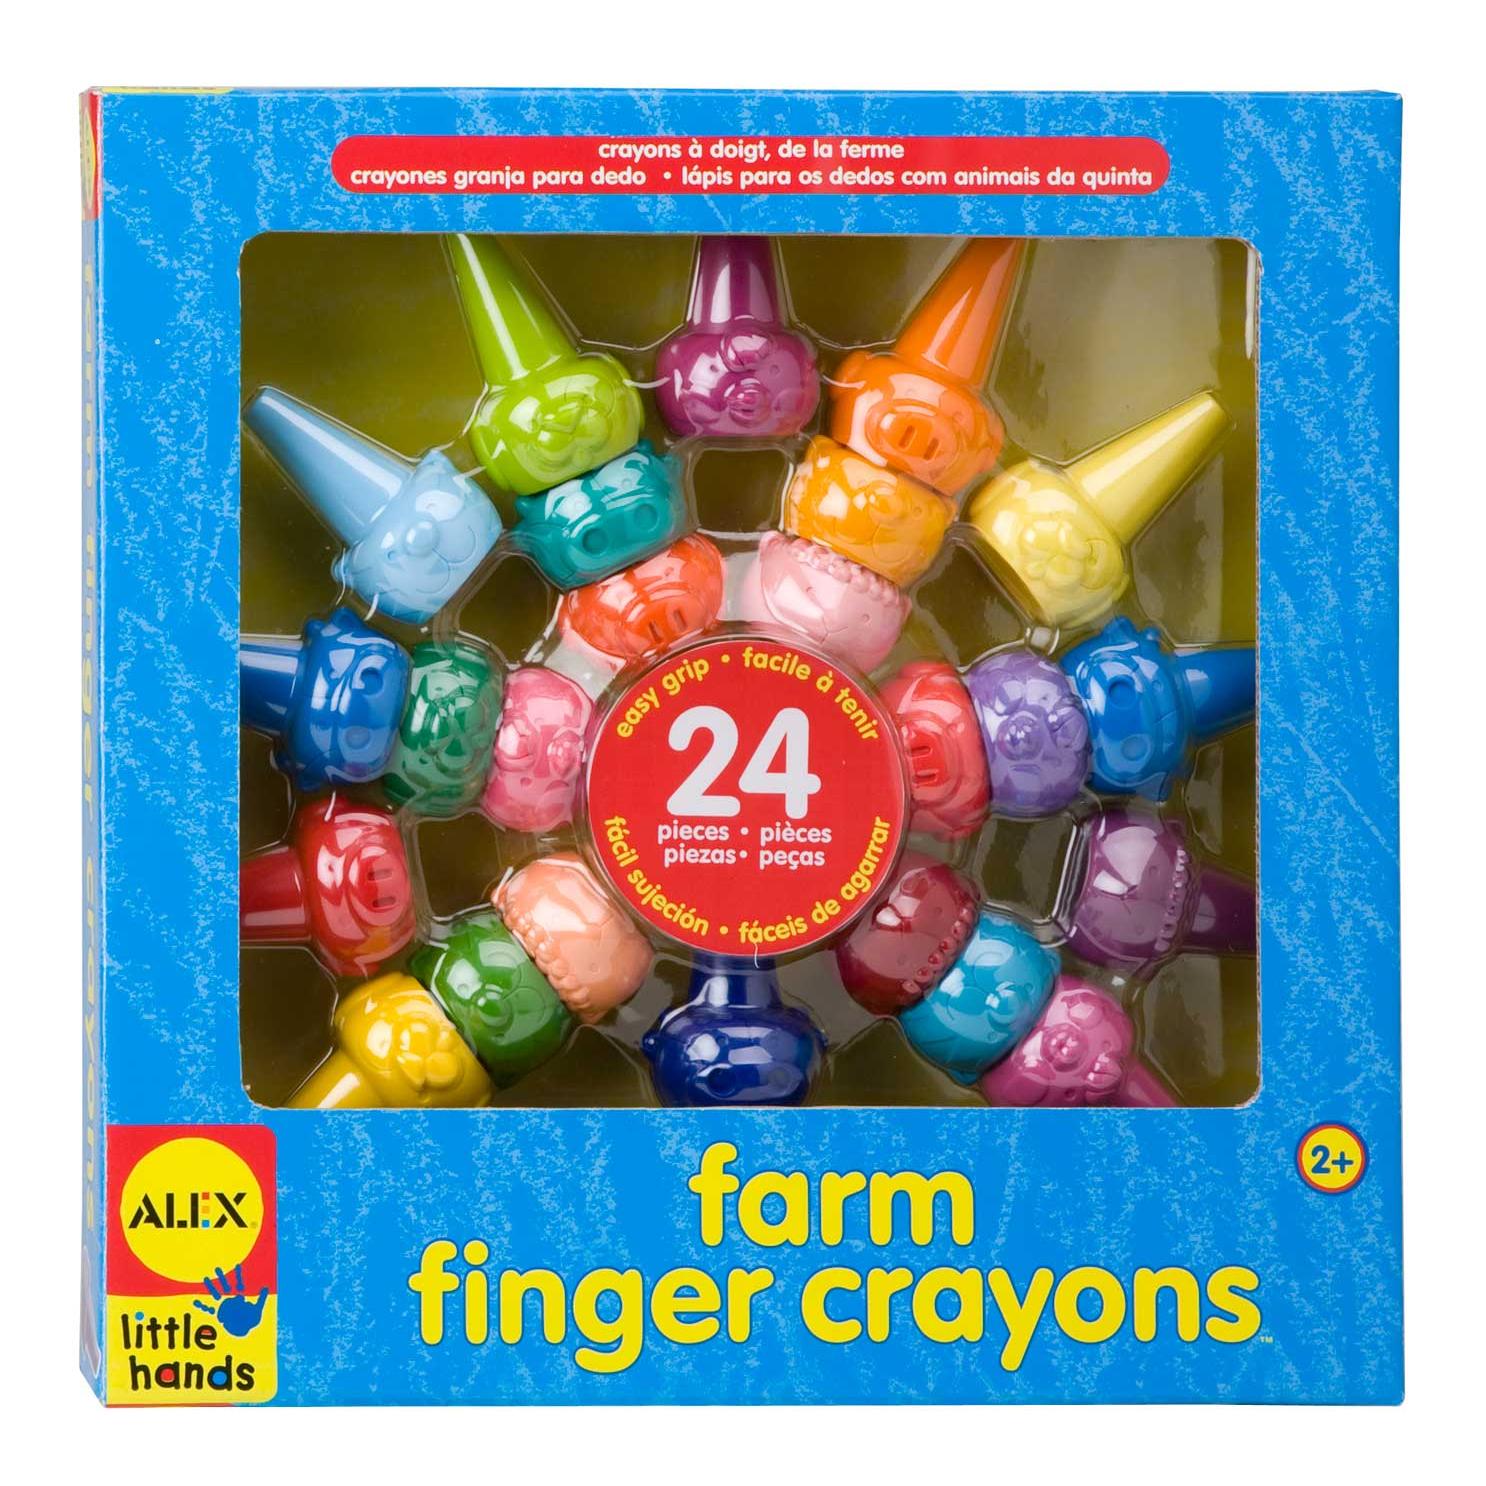 Finger Crayons, Discontinued Products, Finger Crayons from Therapy Shoppe  Finger Crayons, Fine Motor, Pre-Writing Skills, OT Tools-Toys-Products, Special Needs Kids